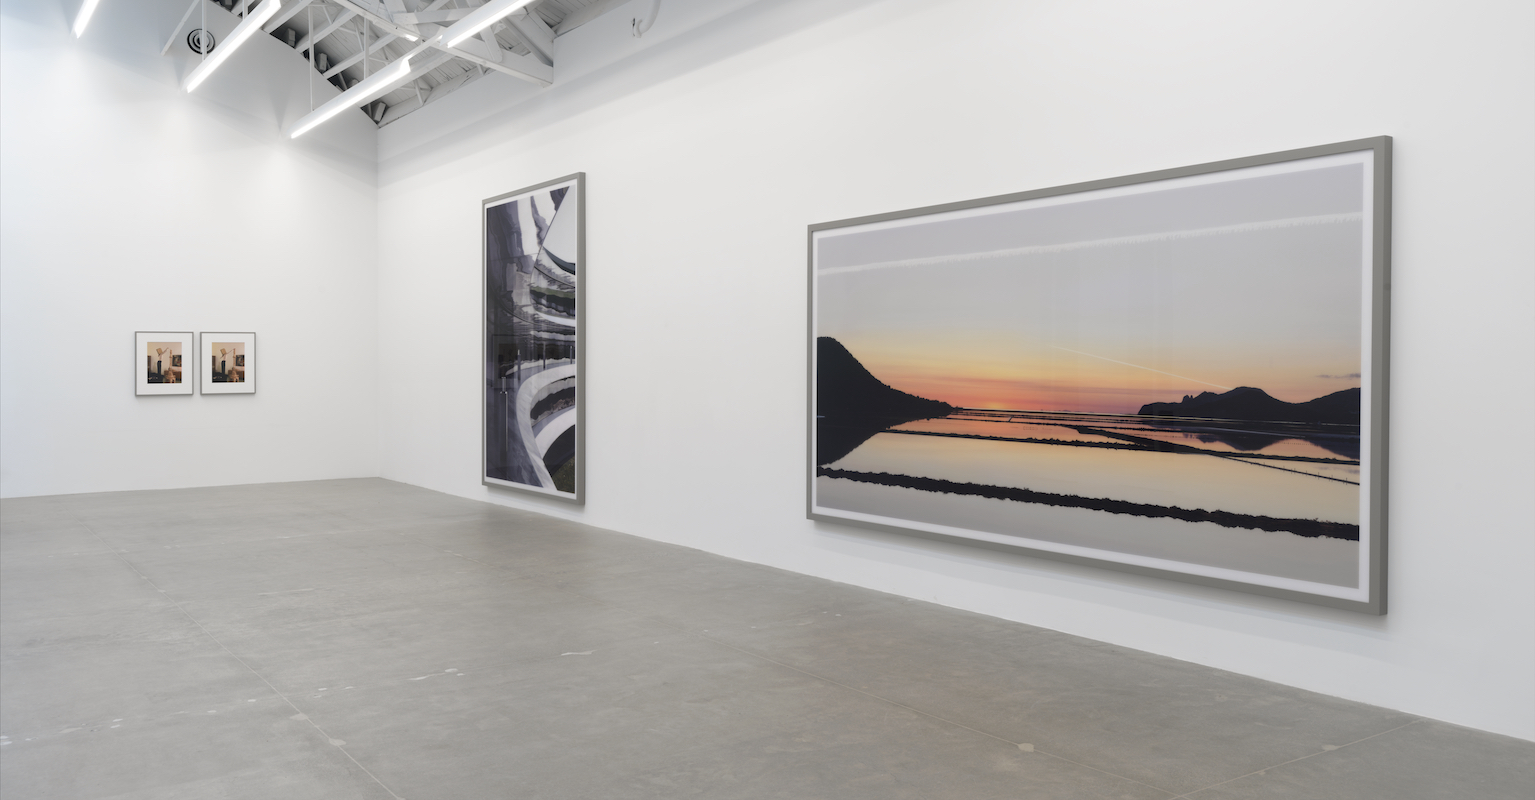 Andreas Gursky, Installation view, 2022
Artworks © Andreas Gursky/Artists Rights Society (ARS), New York
Photo: Rob McKeever
Courtesy Gagosian